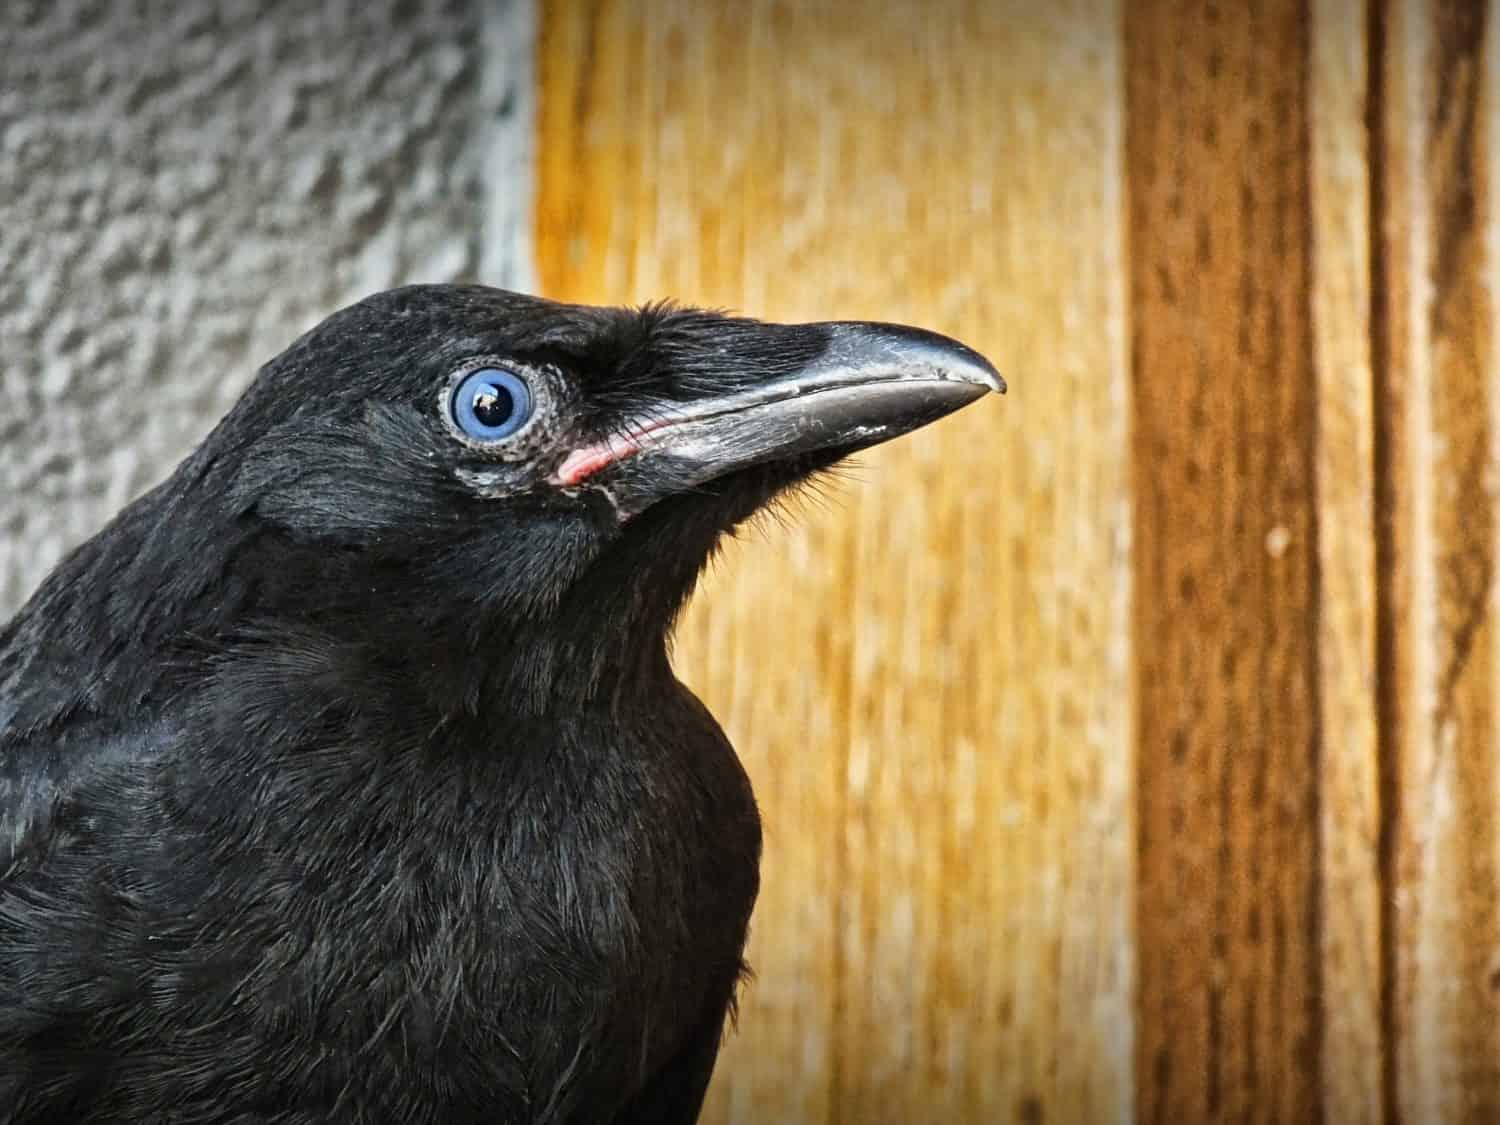 Baby crow lands in the streets of Victoria, BC, Canada